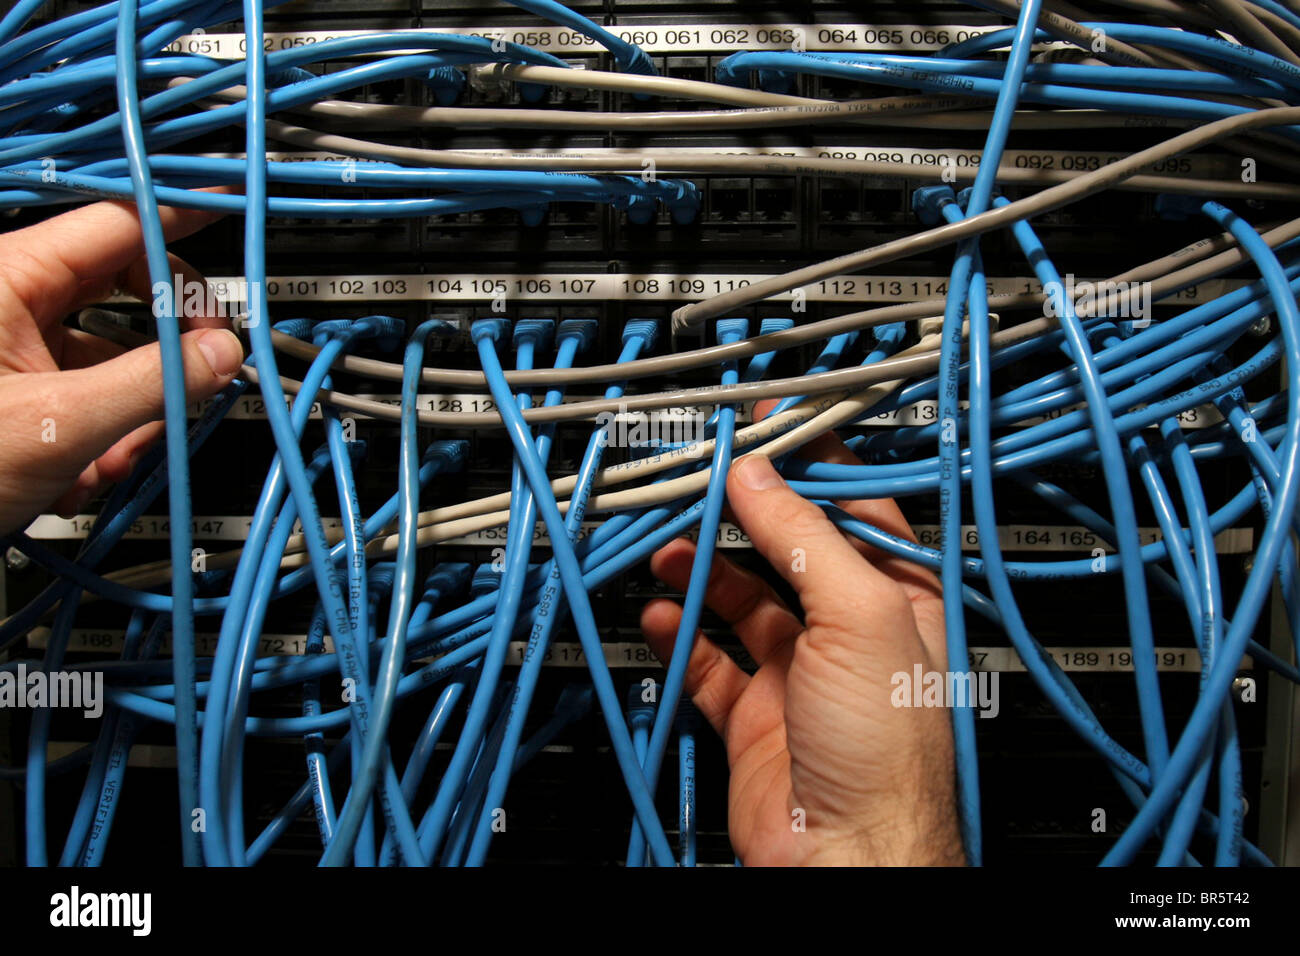 Hands adjusting cables on a Computer network server switchboard Stock Photo  - Alamy